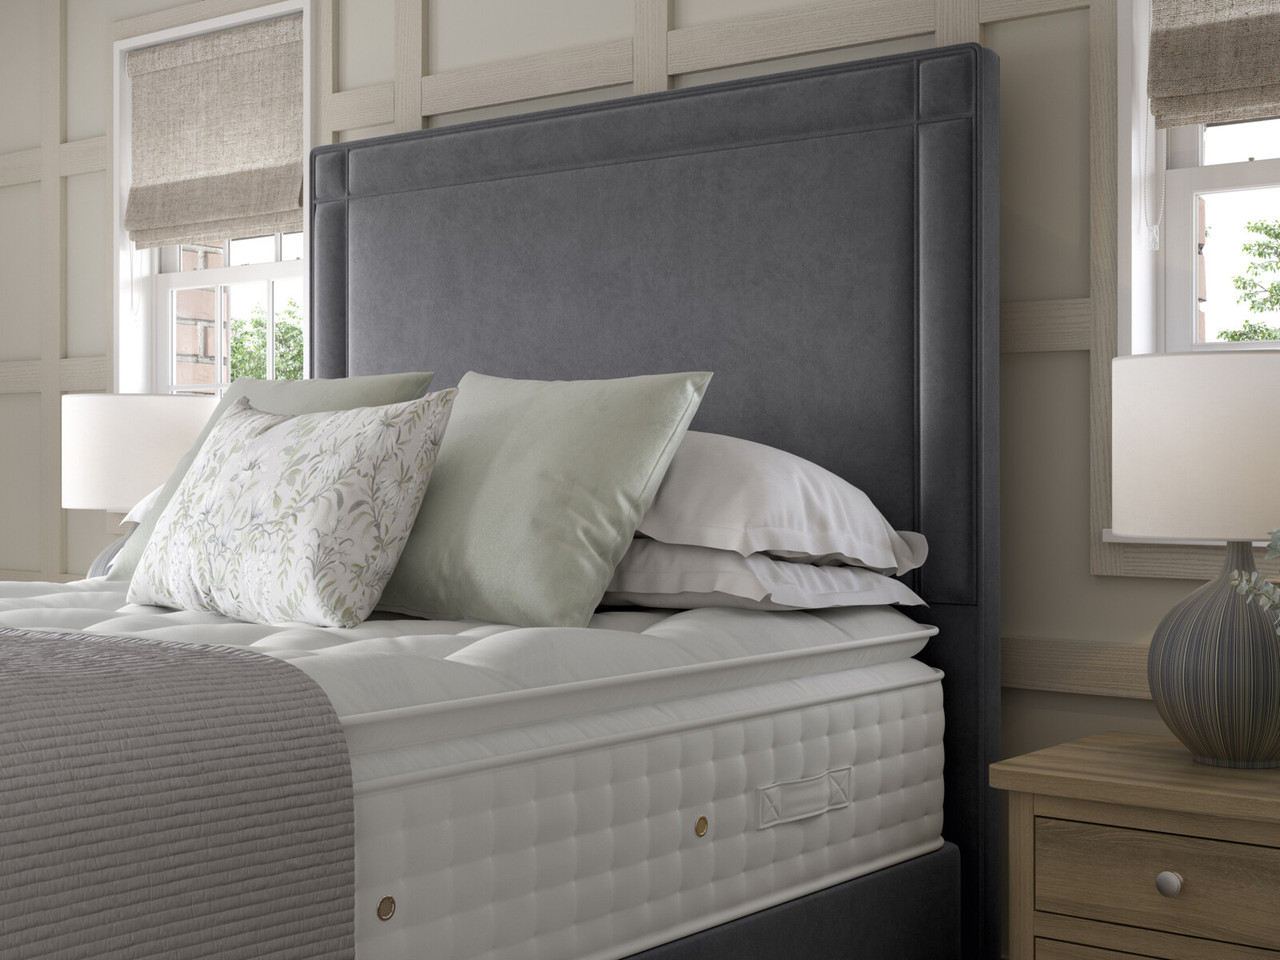 Staples And Co Buckingham Piped Full Length Headboard Double London Tan